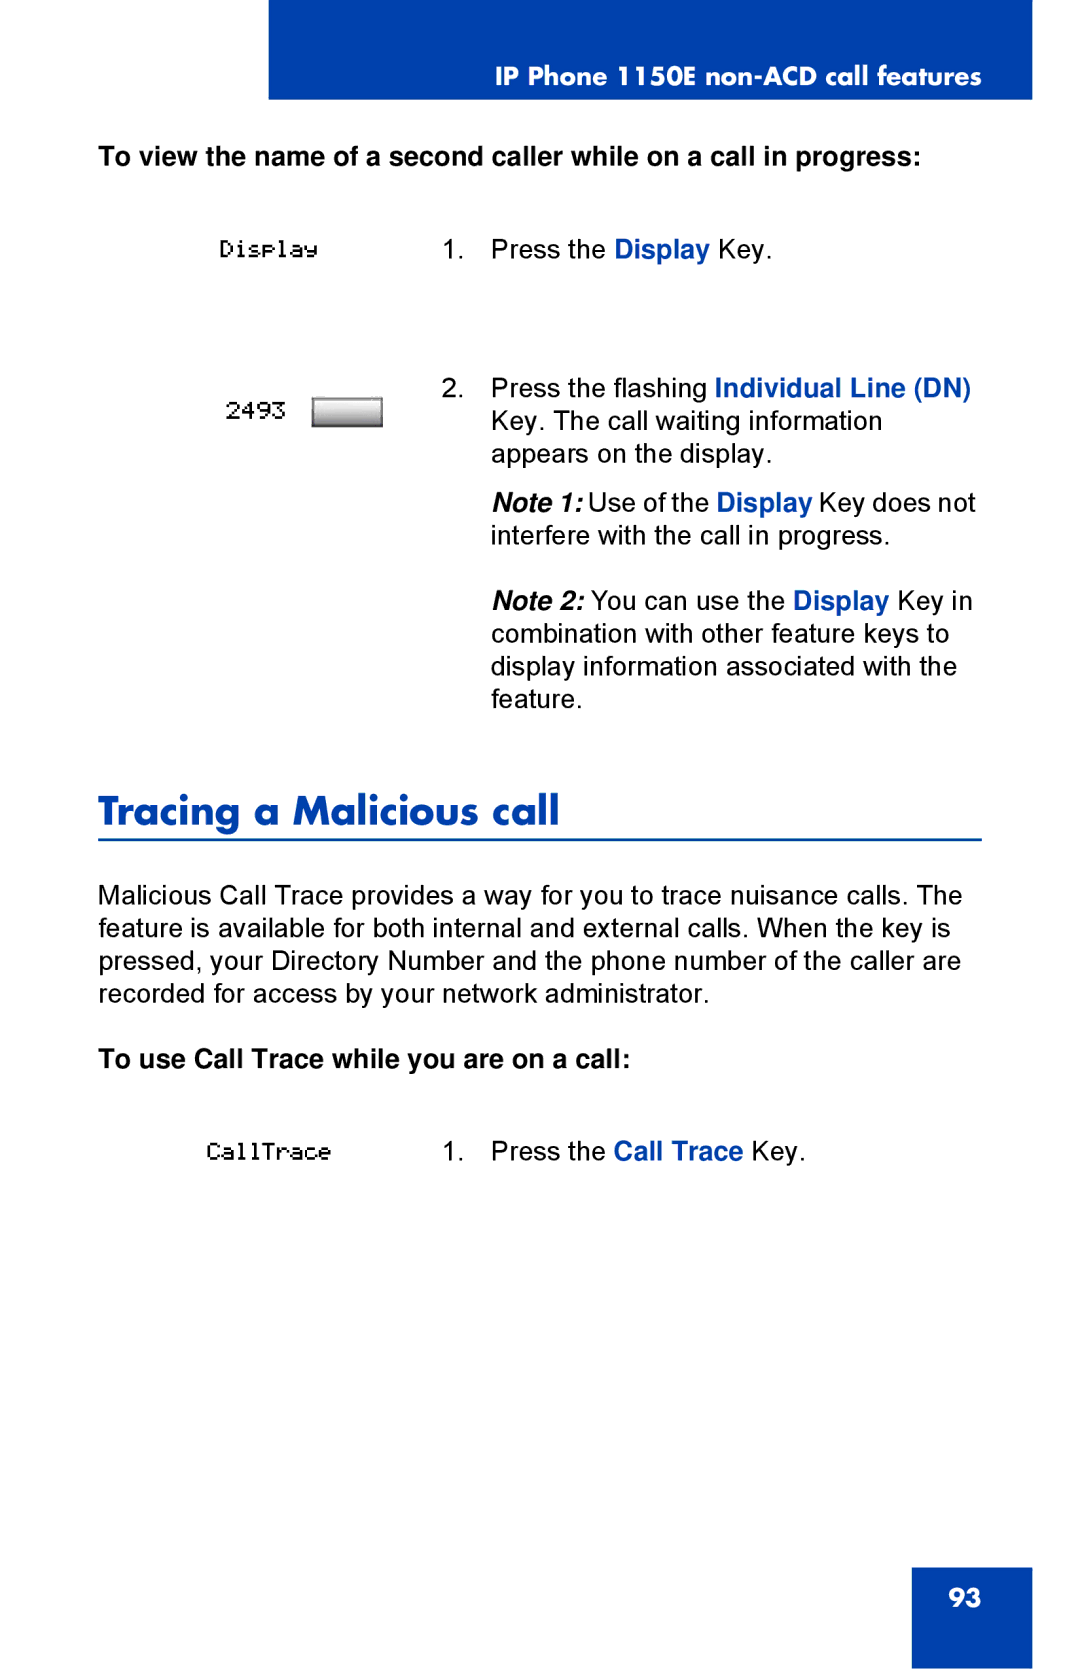 Nortel Networks 1150E manual Tracing a Malicious call, To use Call Trace while you are on a call 